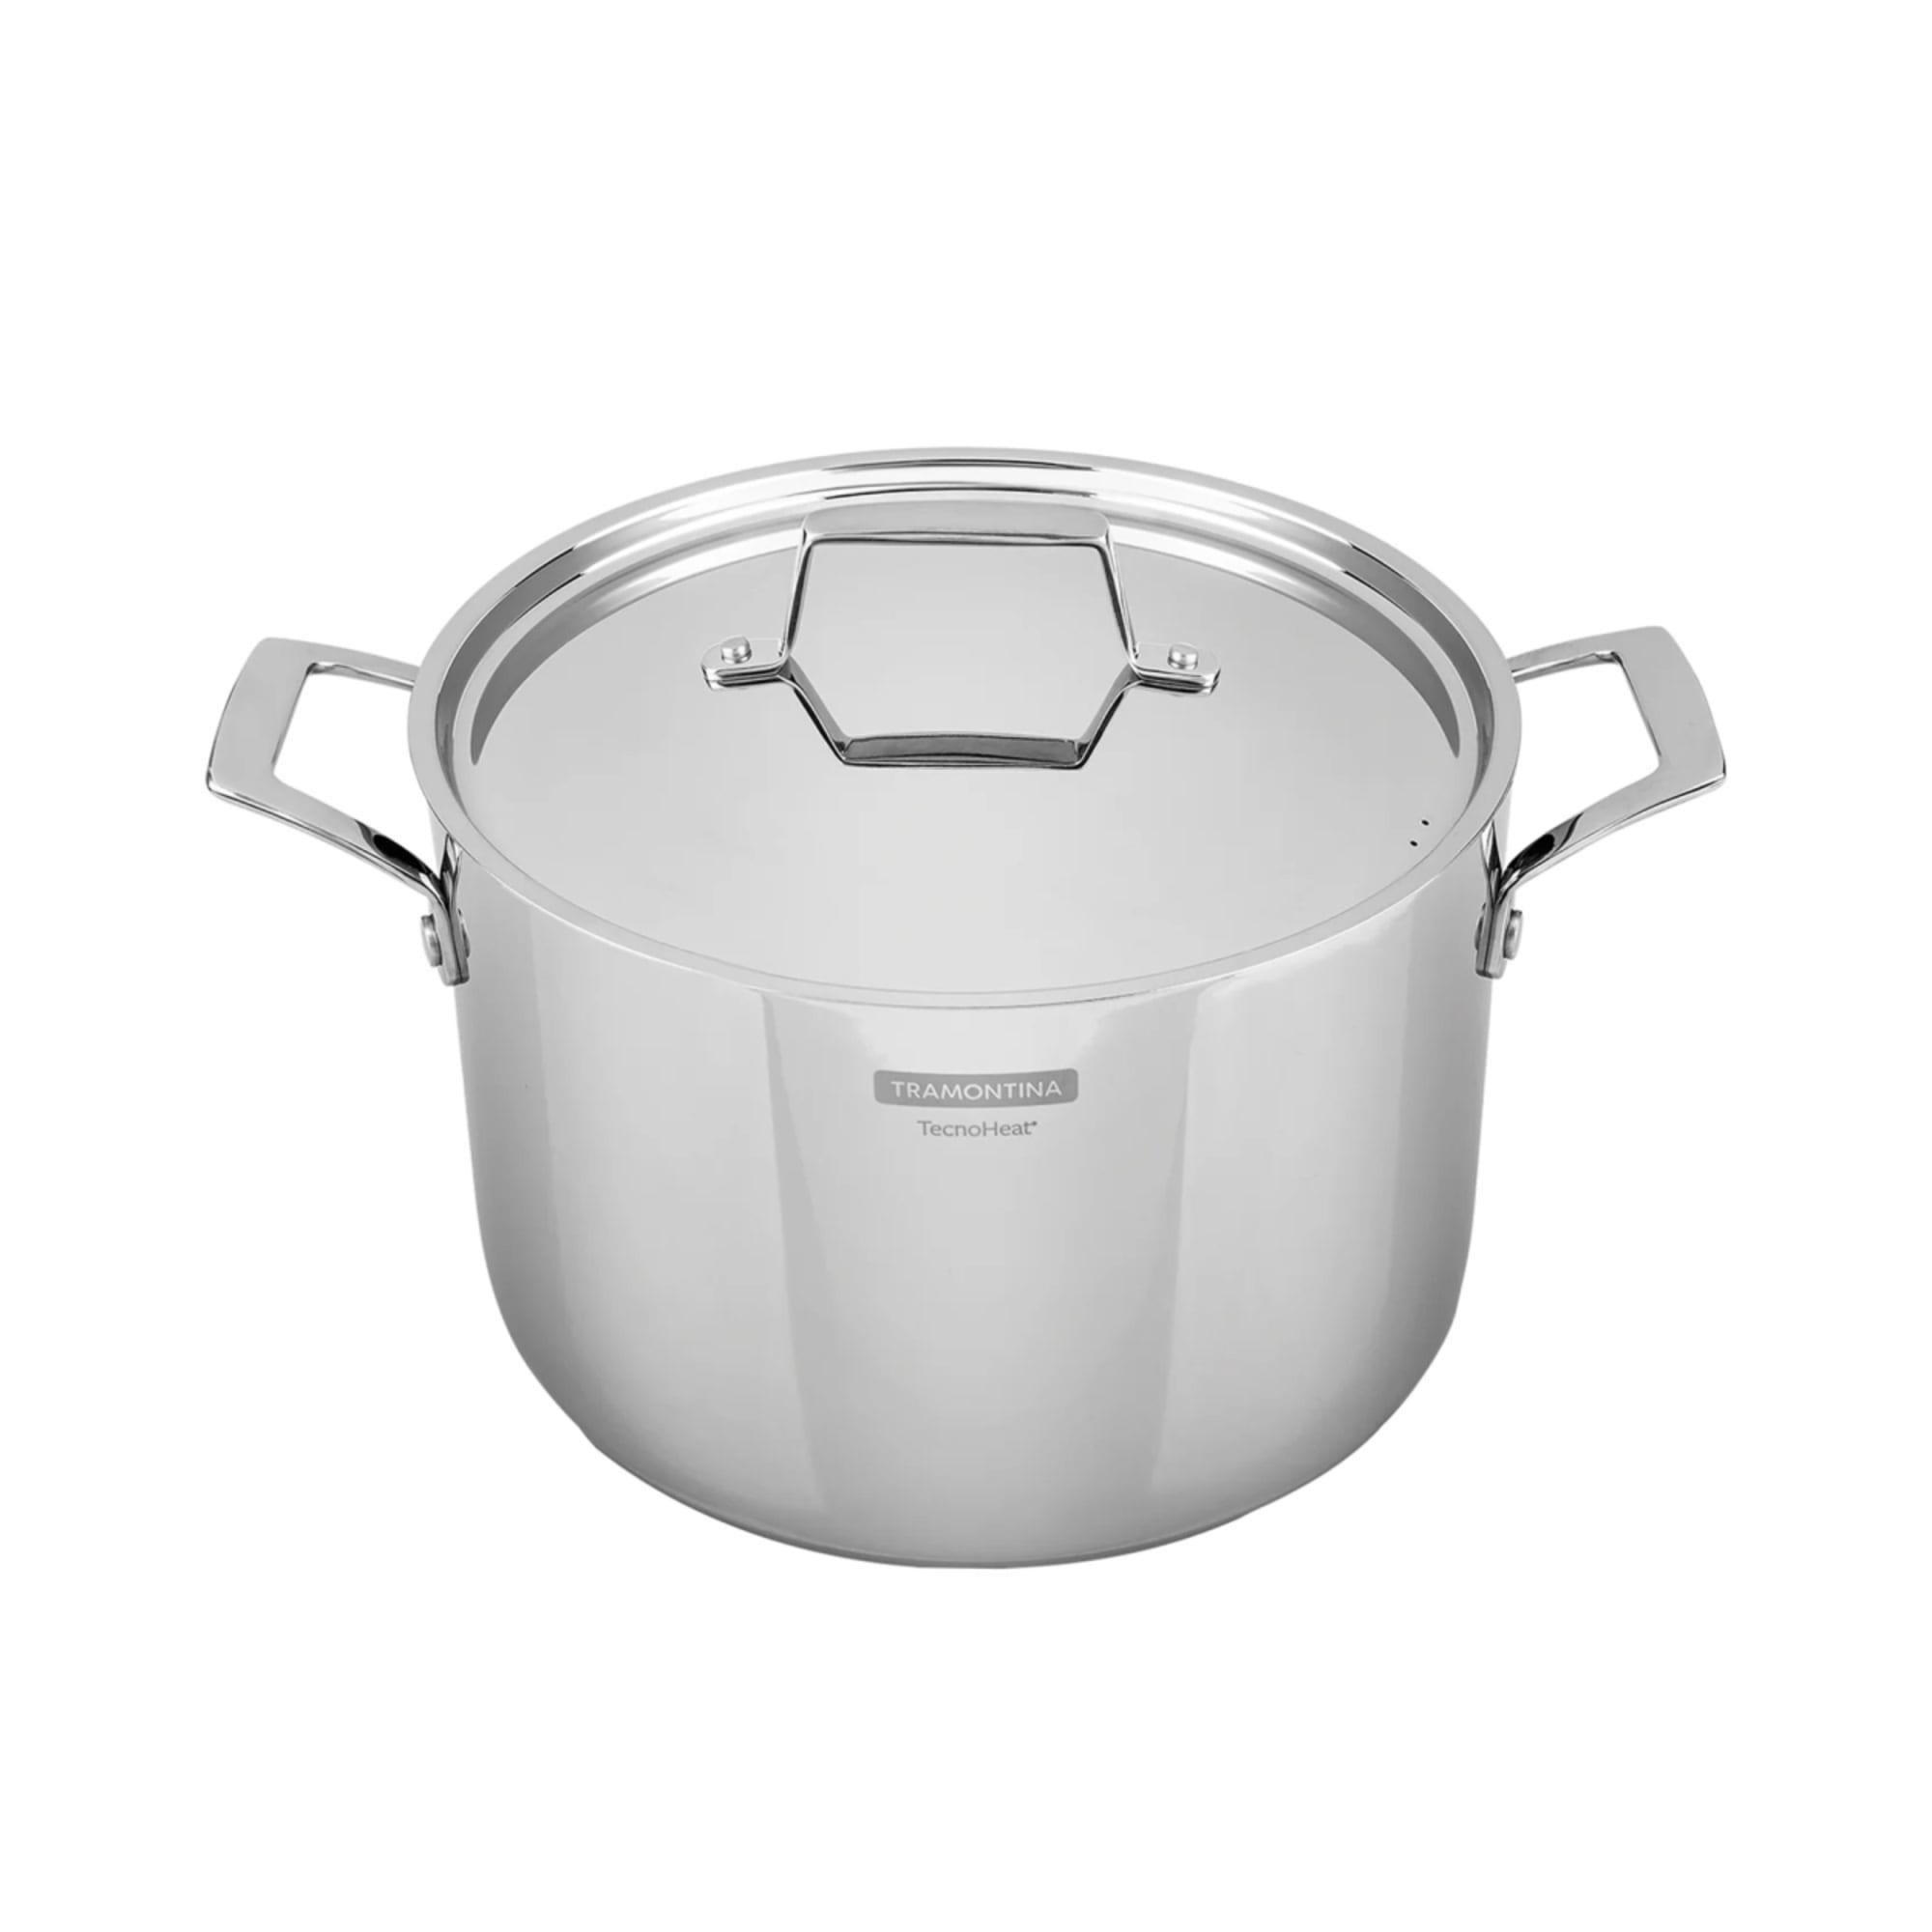 Tramontina Grano Collection Stainless Steel Stock Pot 24cm - 7.7L Image 3